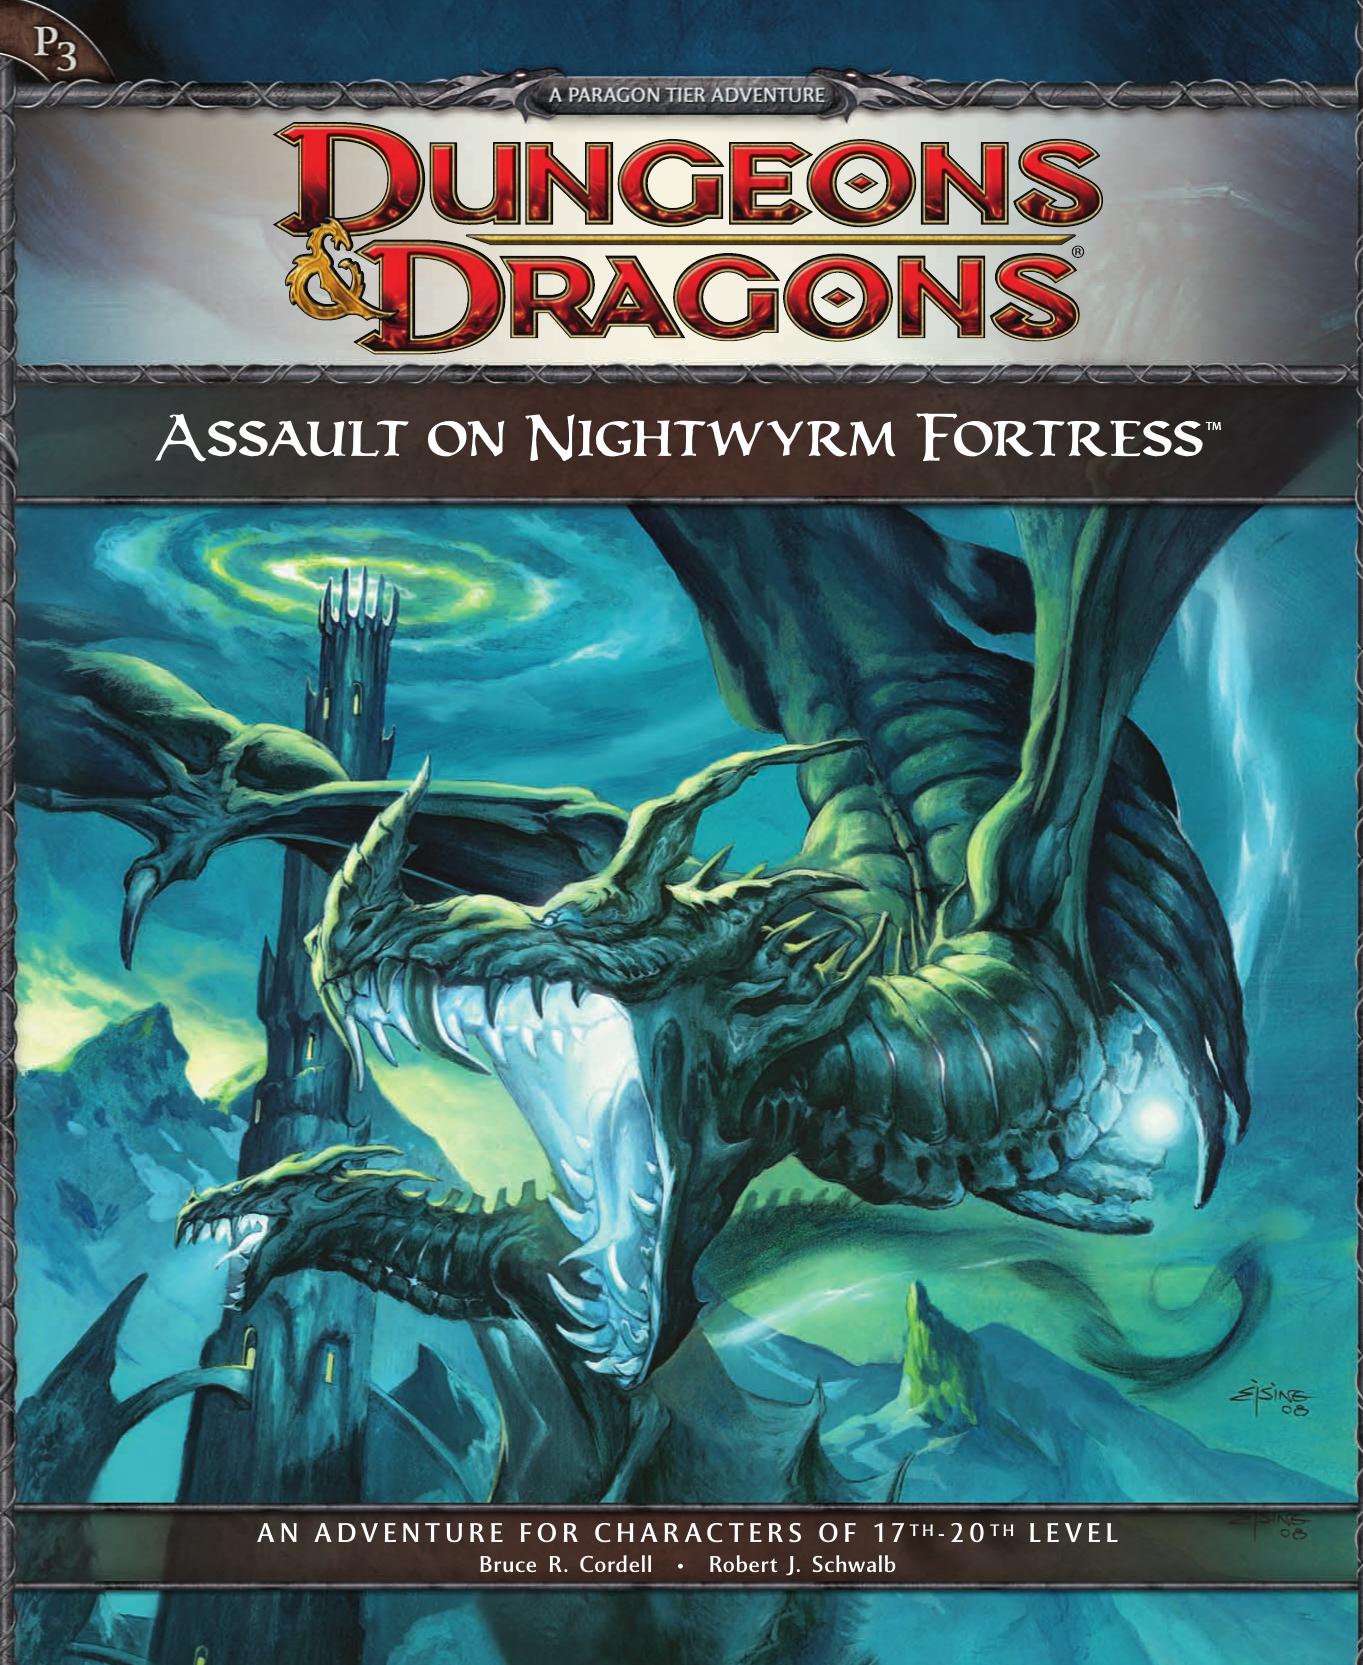 Assault on Nightwyrm Fortress: Adventure P3 for 4th Edition D&D